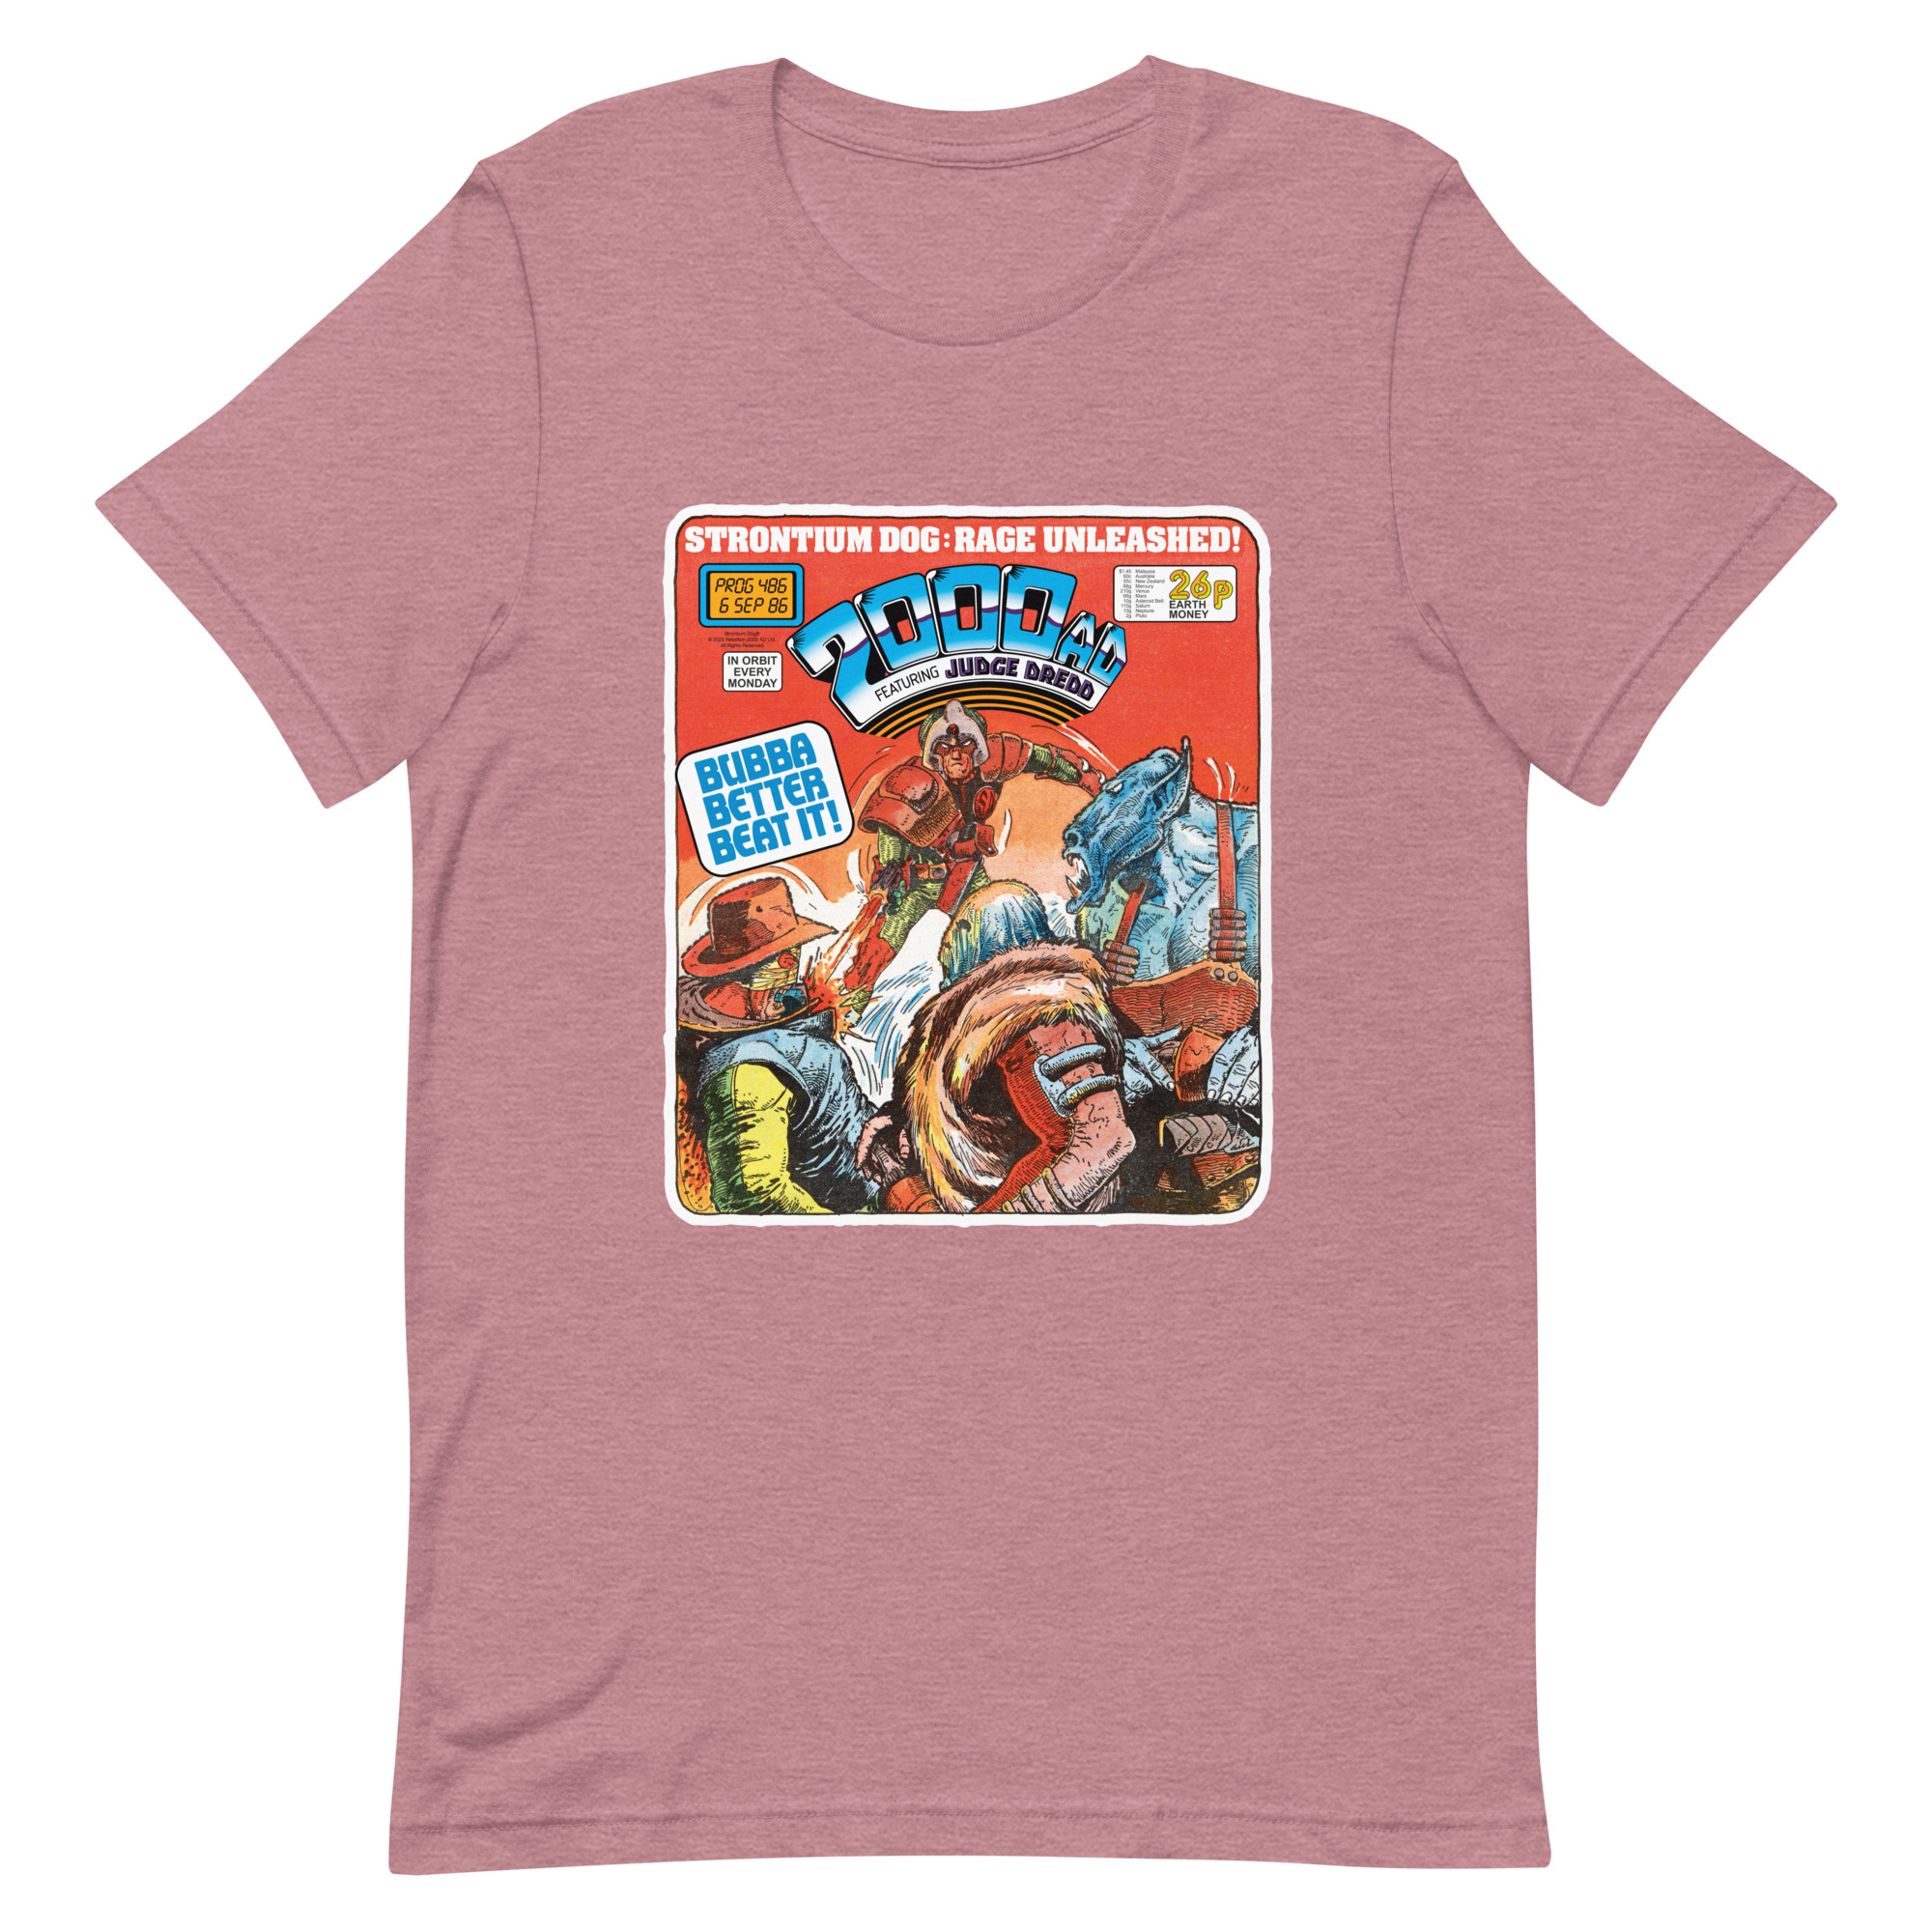 Pink Tshirt with a 'Classic' 2000 AD Cover image on the chest. In the image Strontium Dog faces off against three alien ruffians.